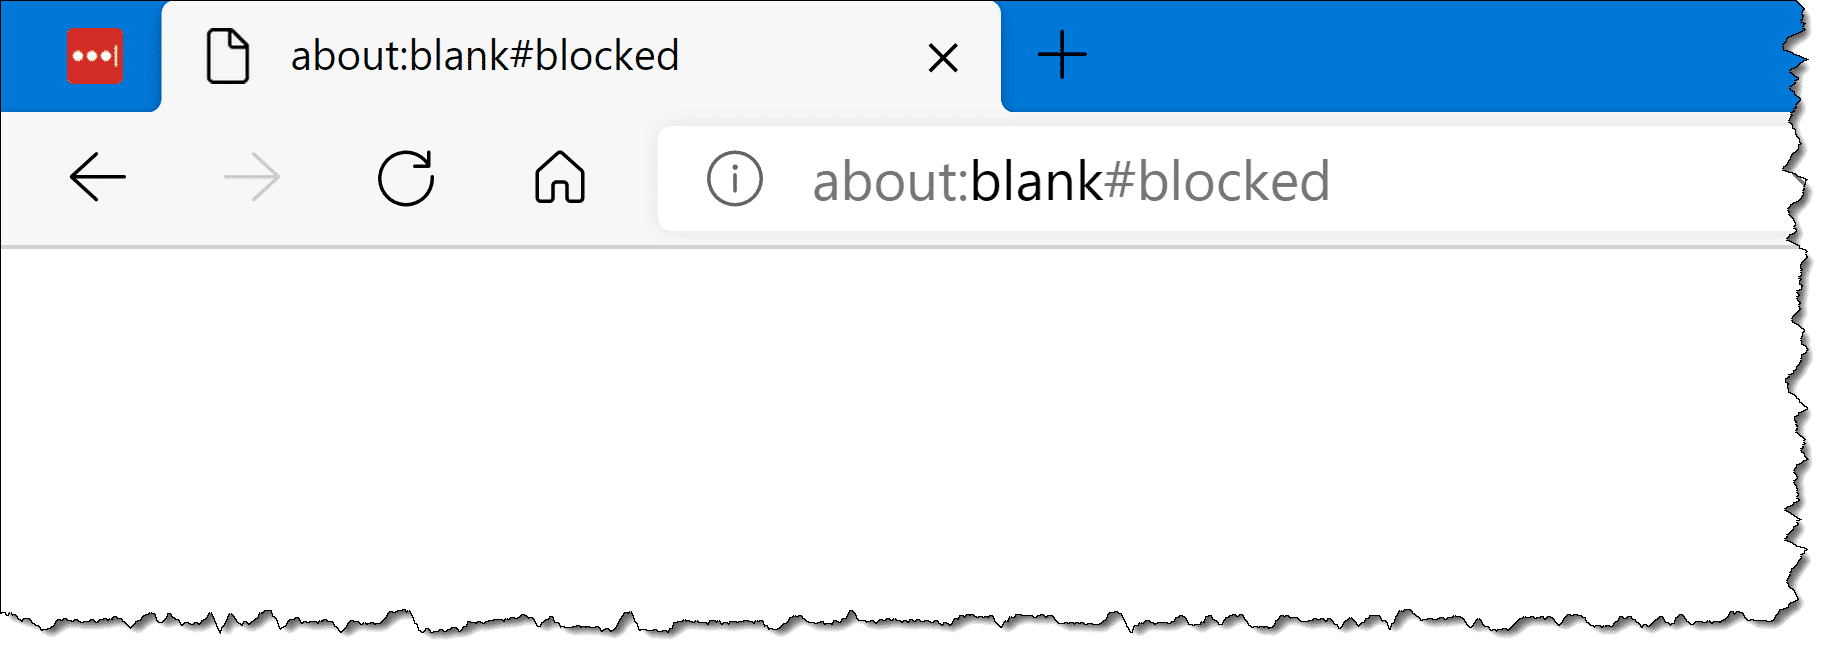 https://askleo.com/wp-content/uploads/2020/06/about-blank.png